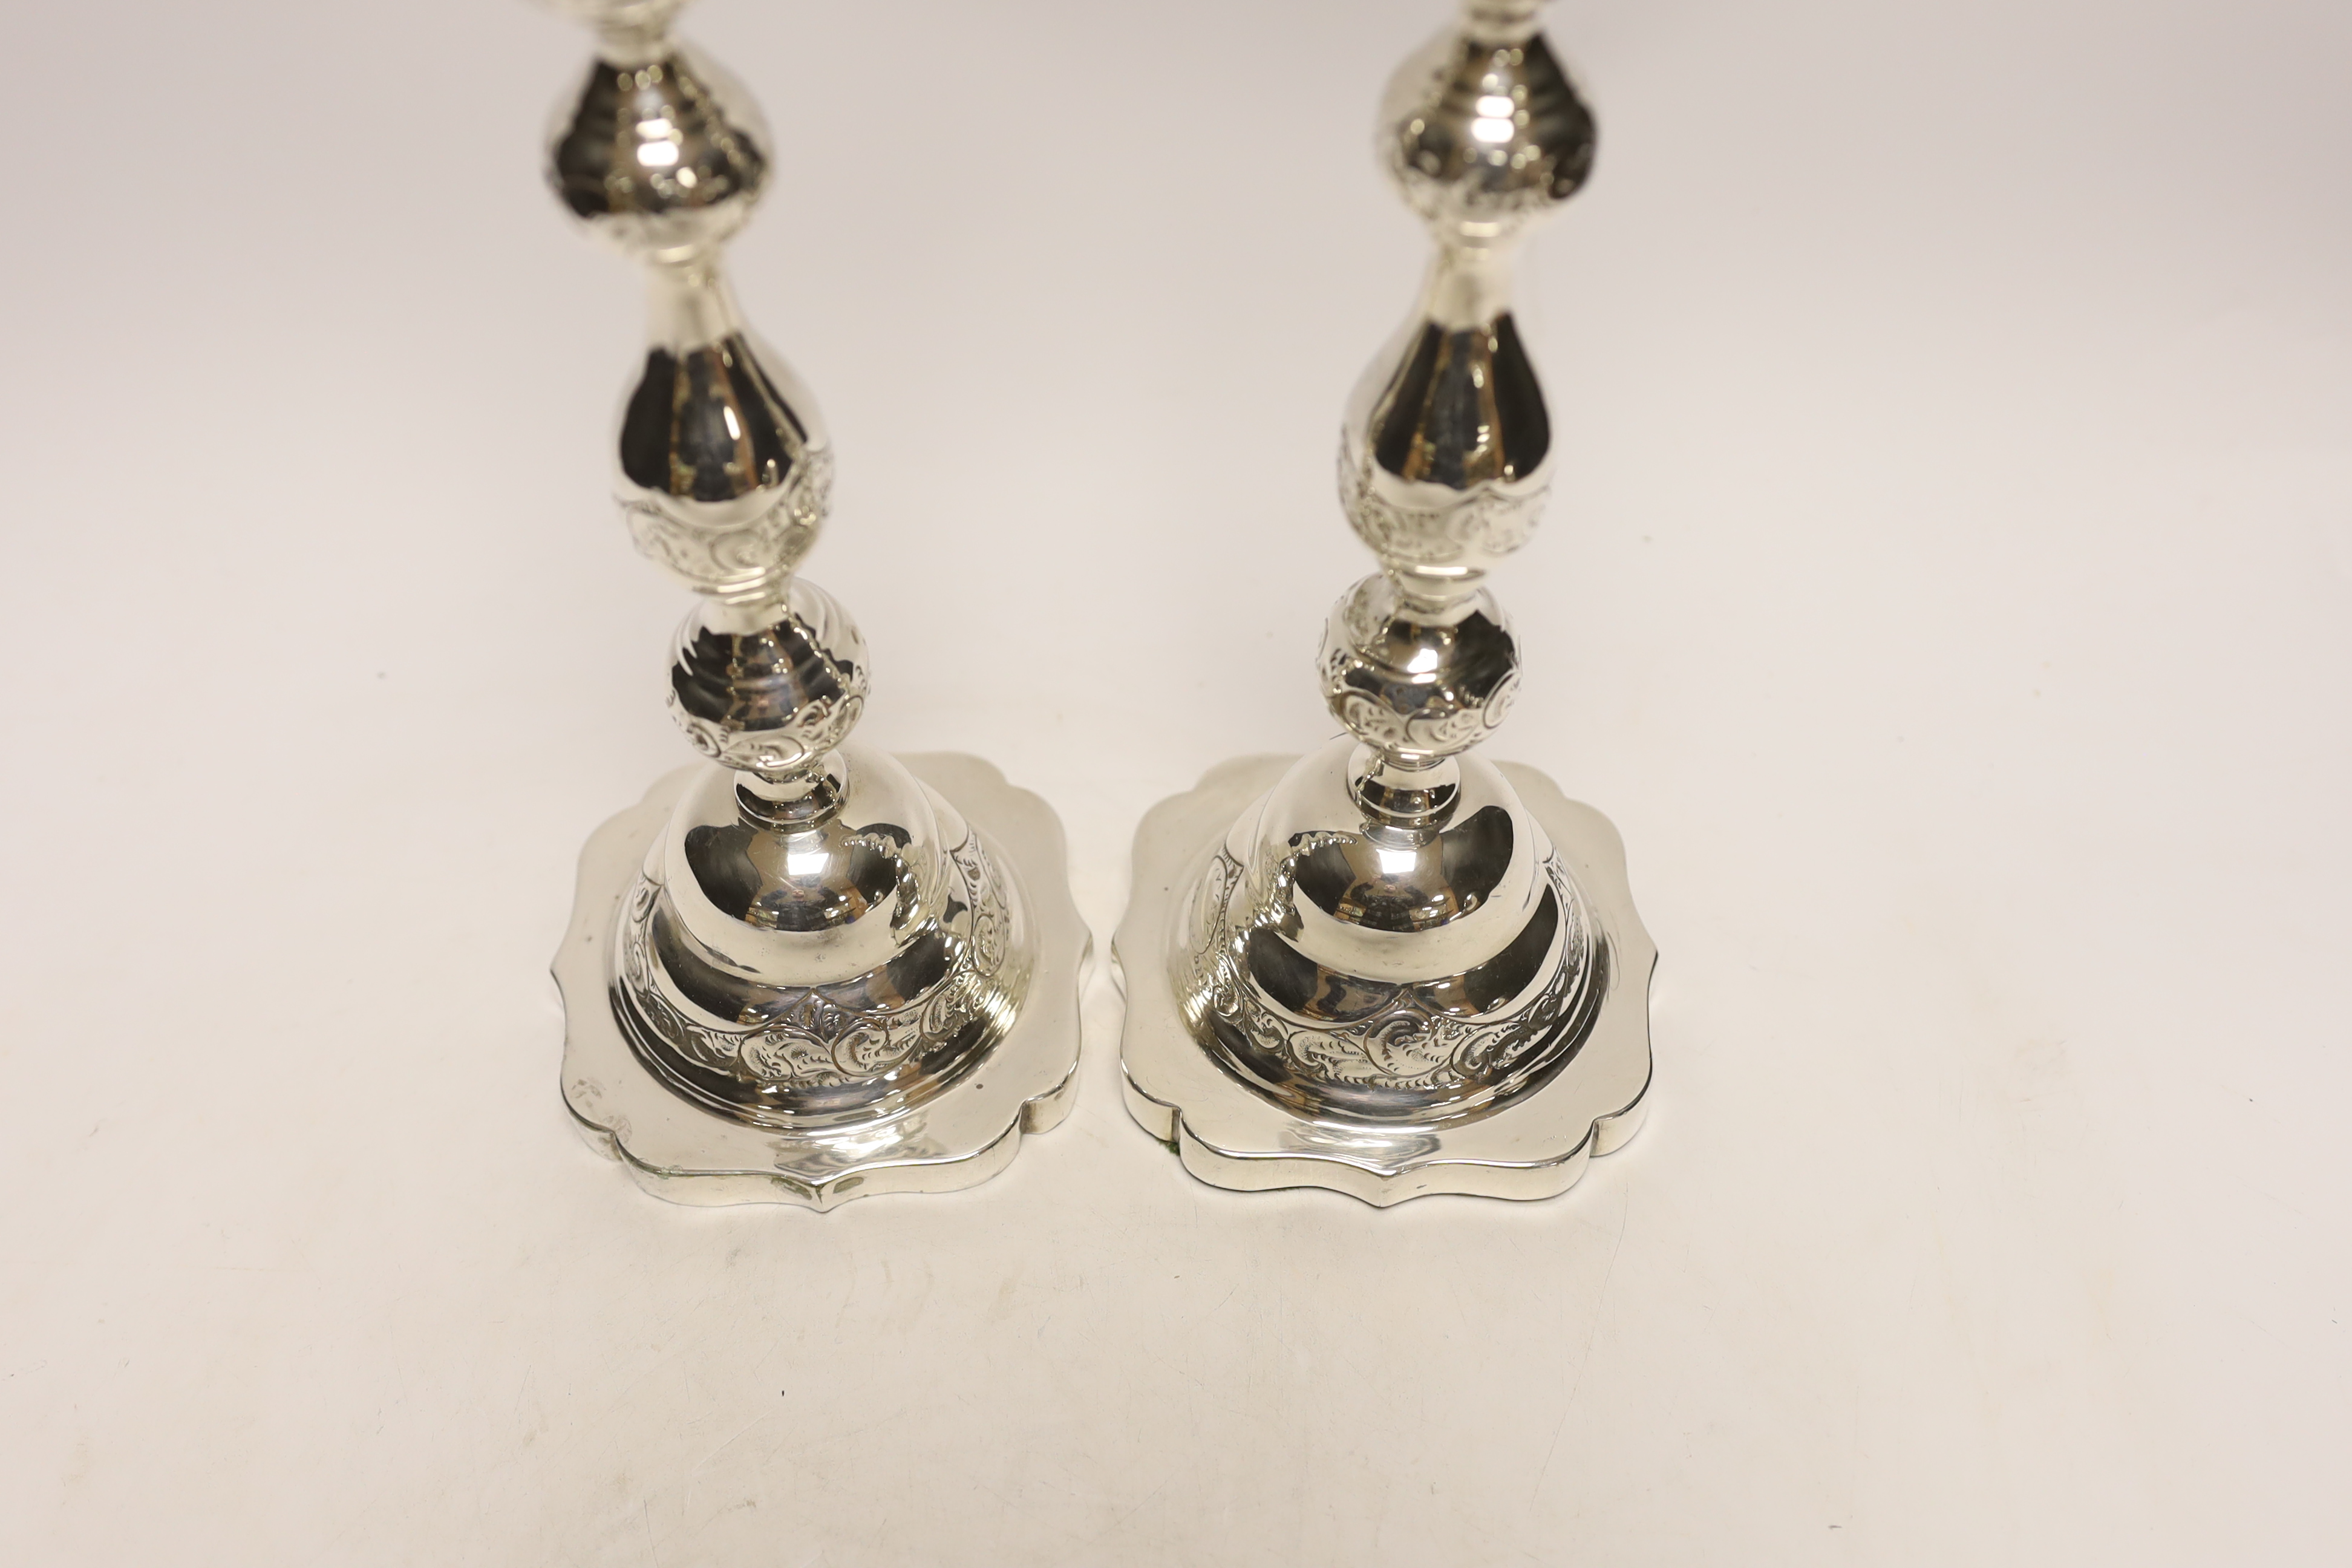 A pair of George V silver Sabbath candlesticks, by Rosenzweig, Taitelbaum & Co, London, circa 1925, marks rubbed, height 29.4cm, weighted.